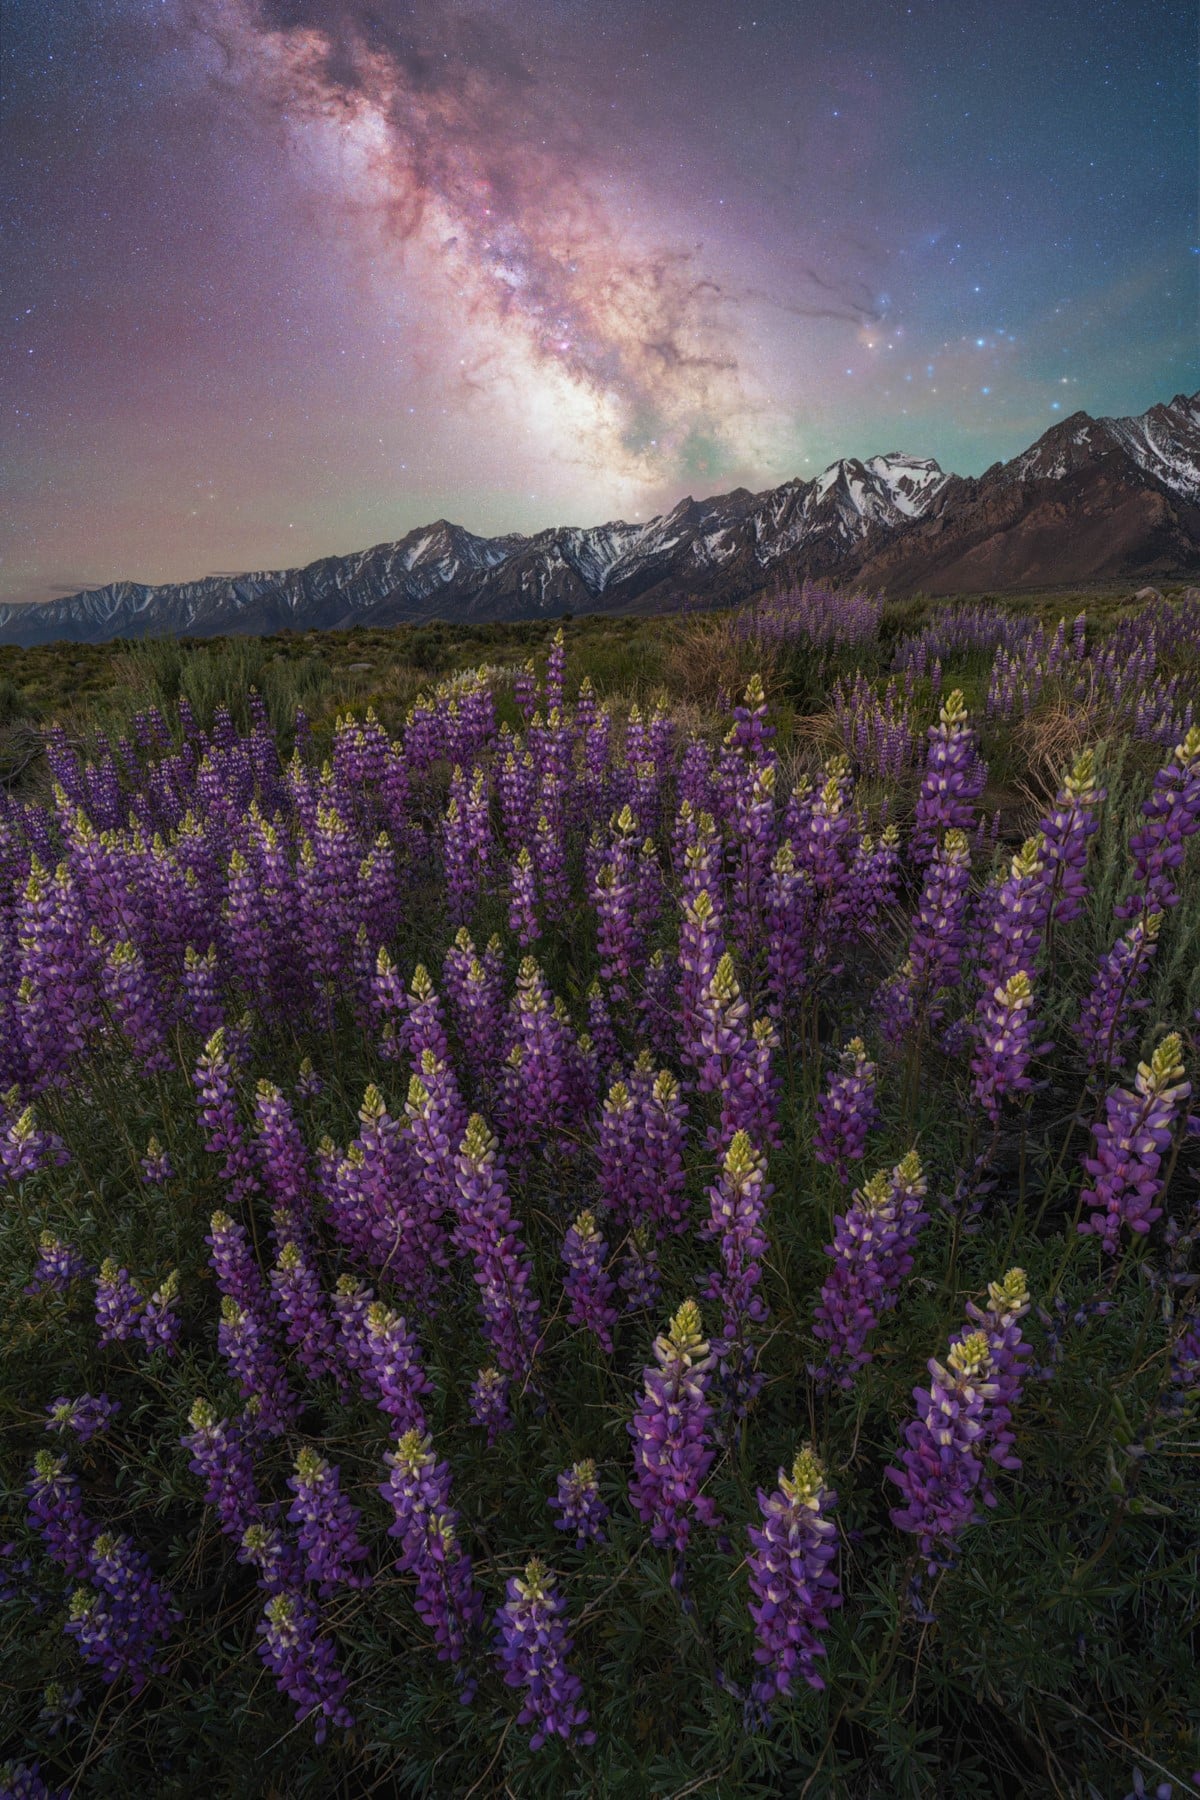 Milky Way over the Eastern Sierra mountains with wildflowers in the foreground